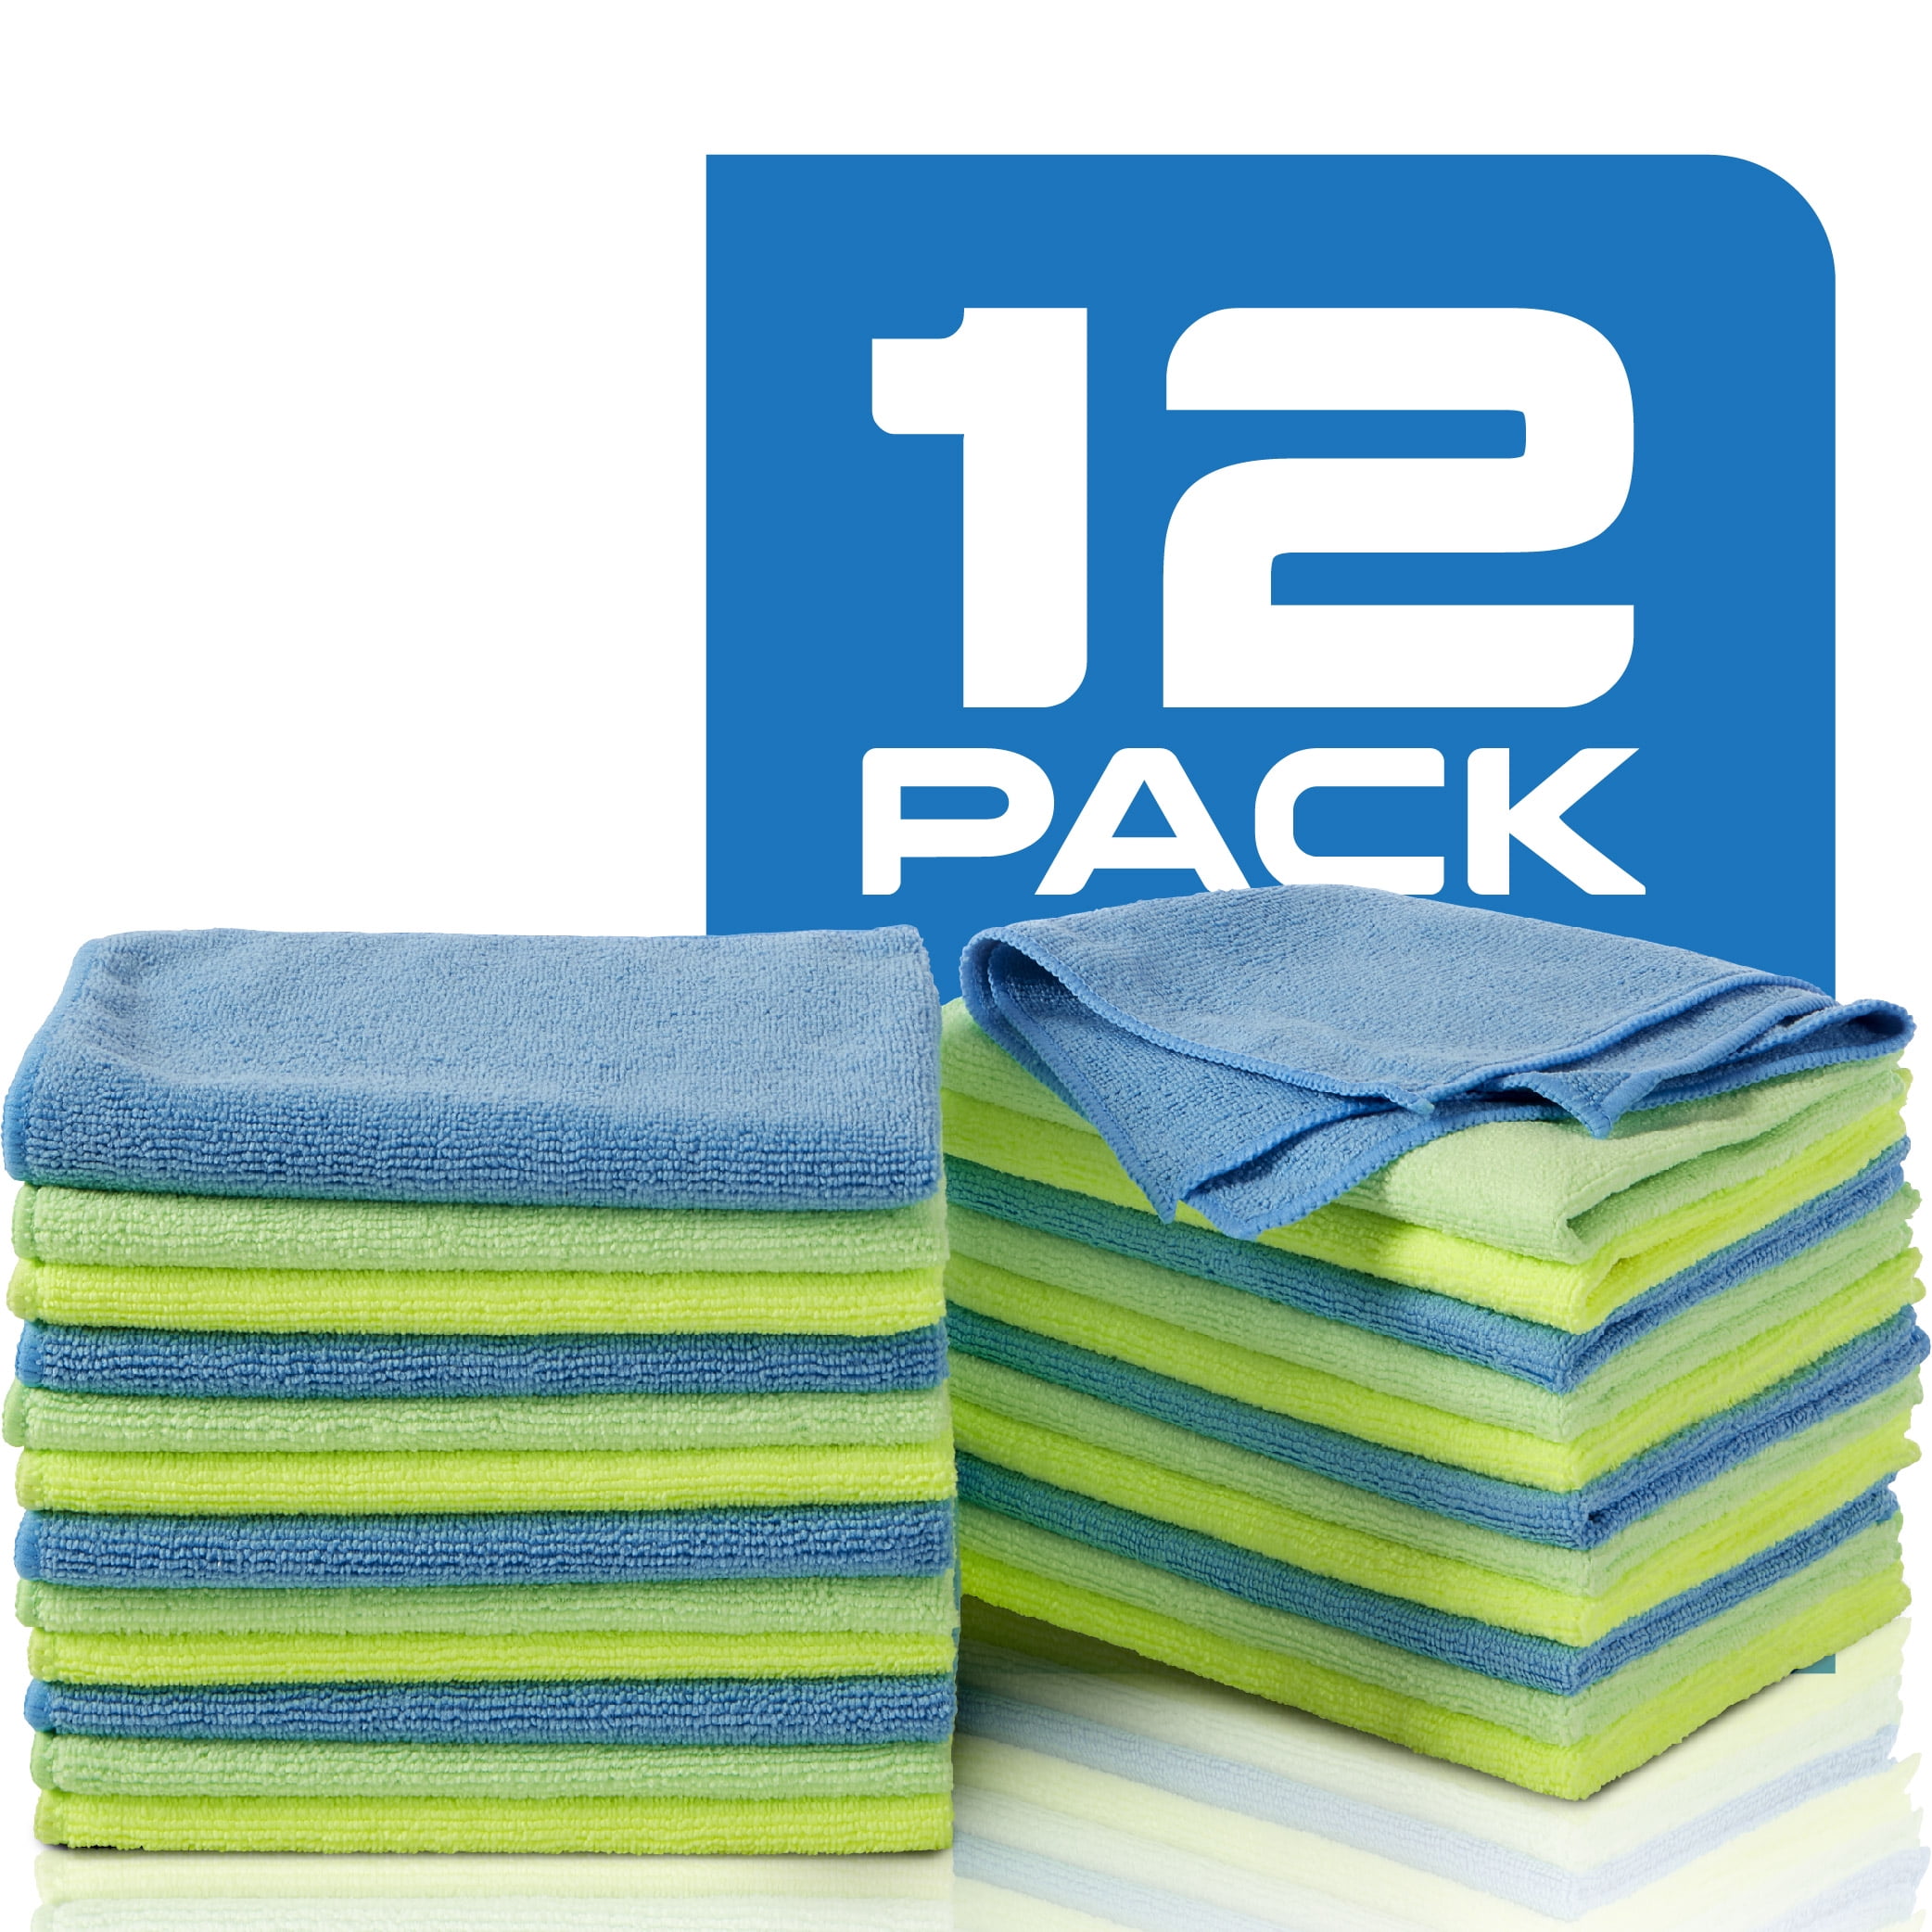 Zwipes Microfiber Cleaning Cloths, Assorted - 12 pack